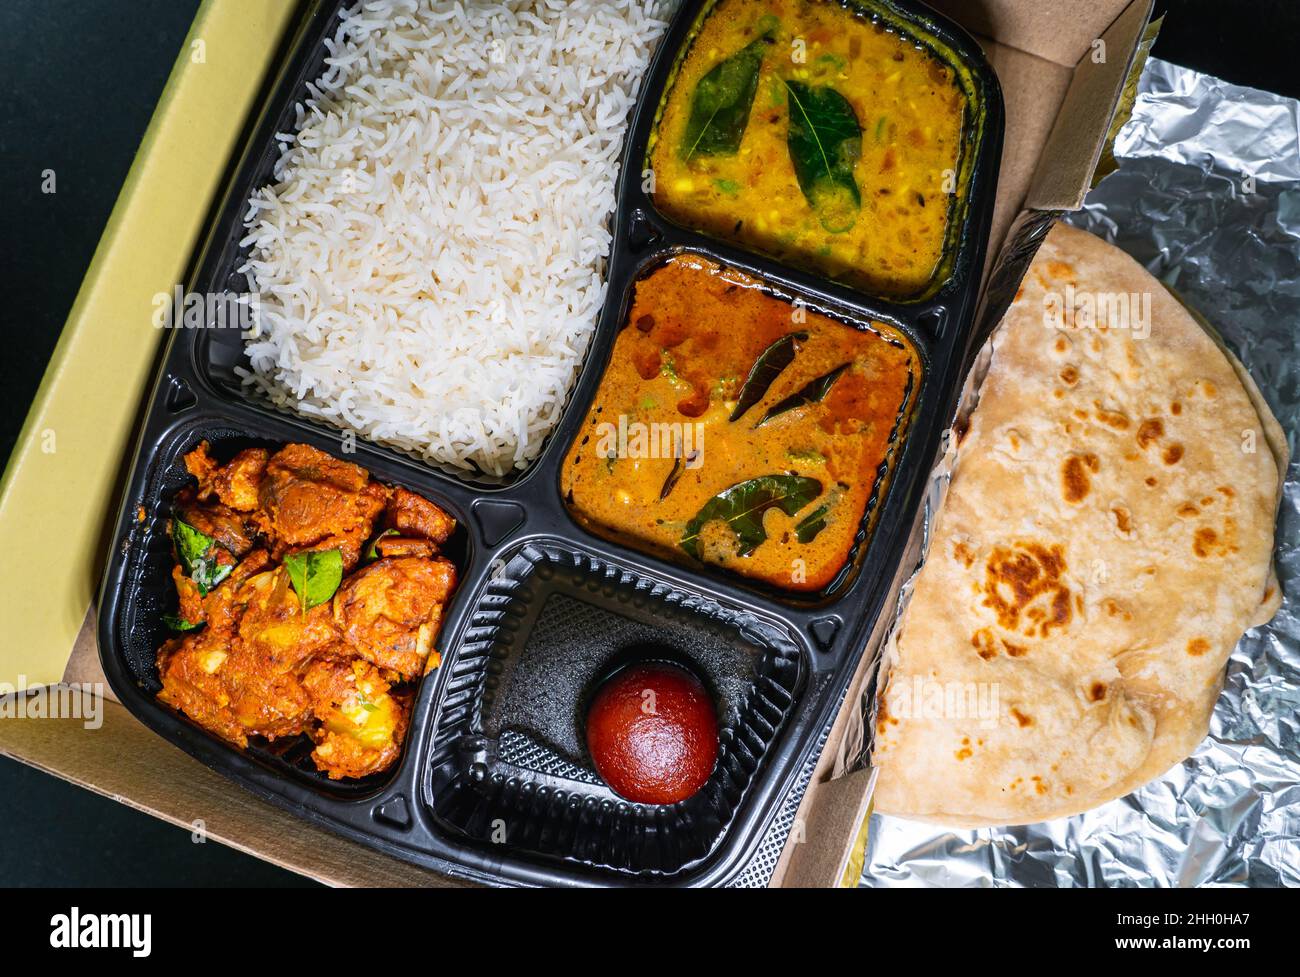 Selective focus of a variety of Indian takeout food. Stock Photo